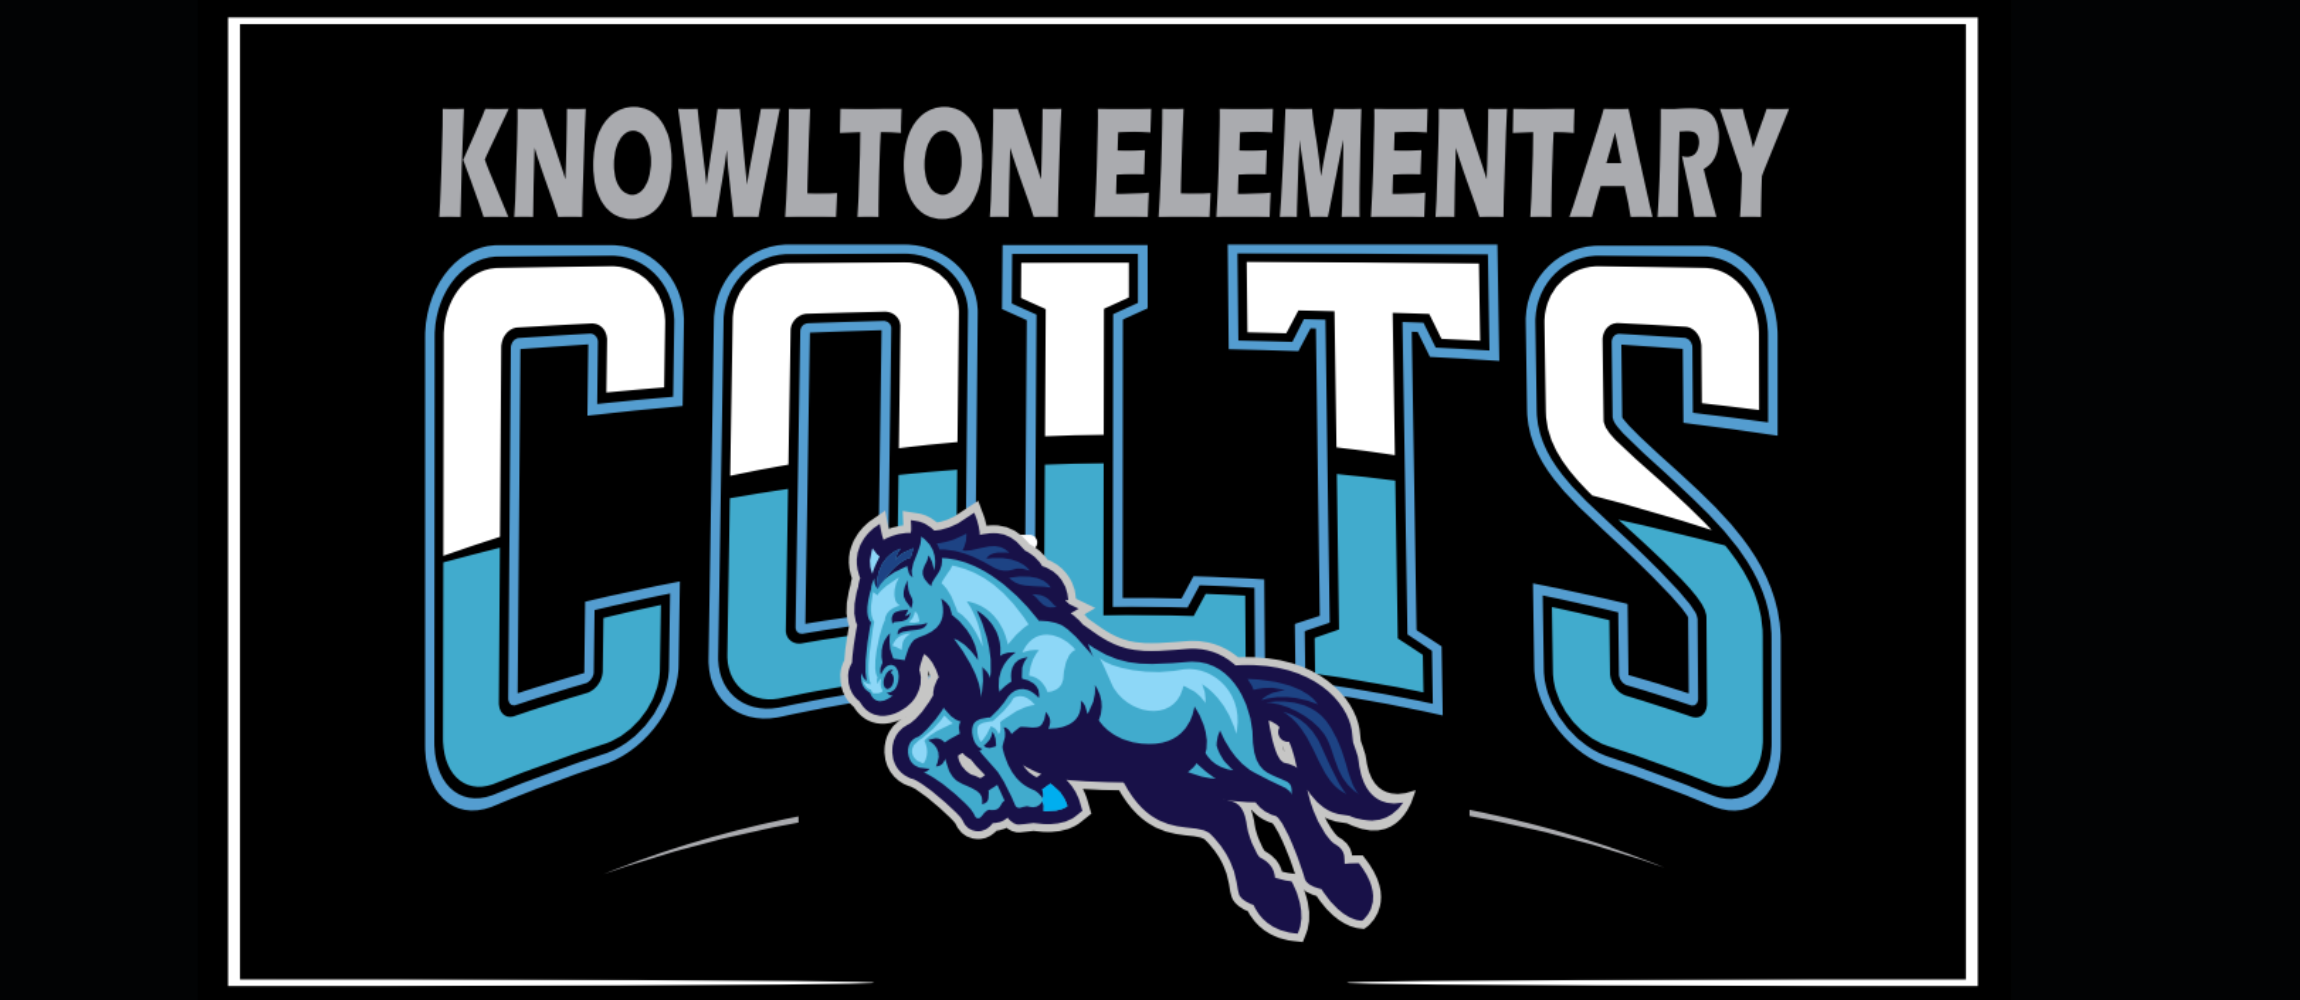 Knowlton Colts Are The G.O.A.T